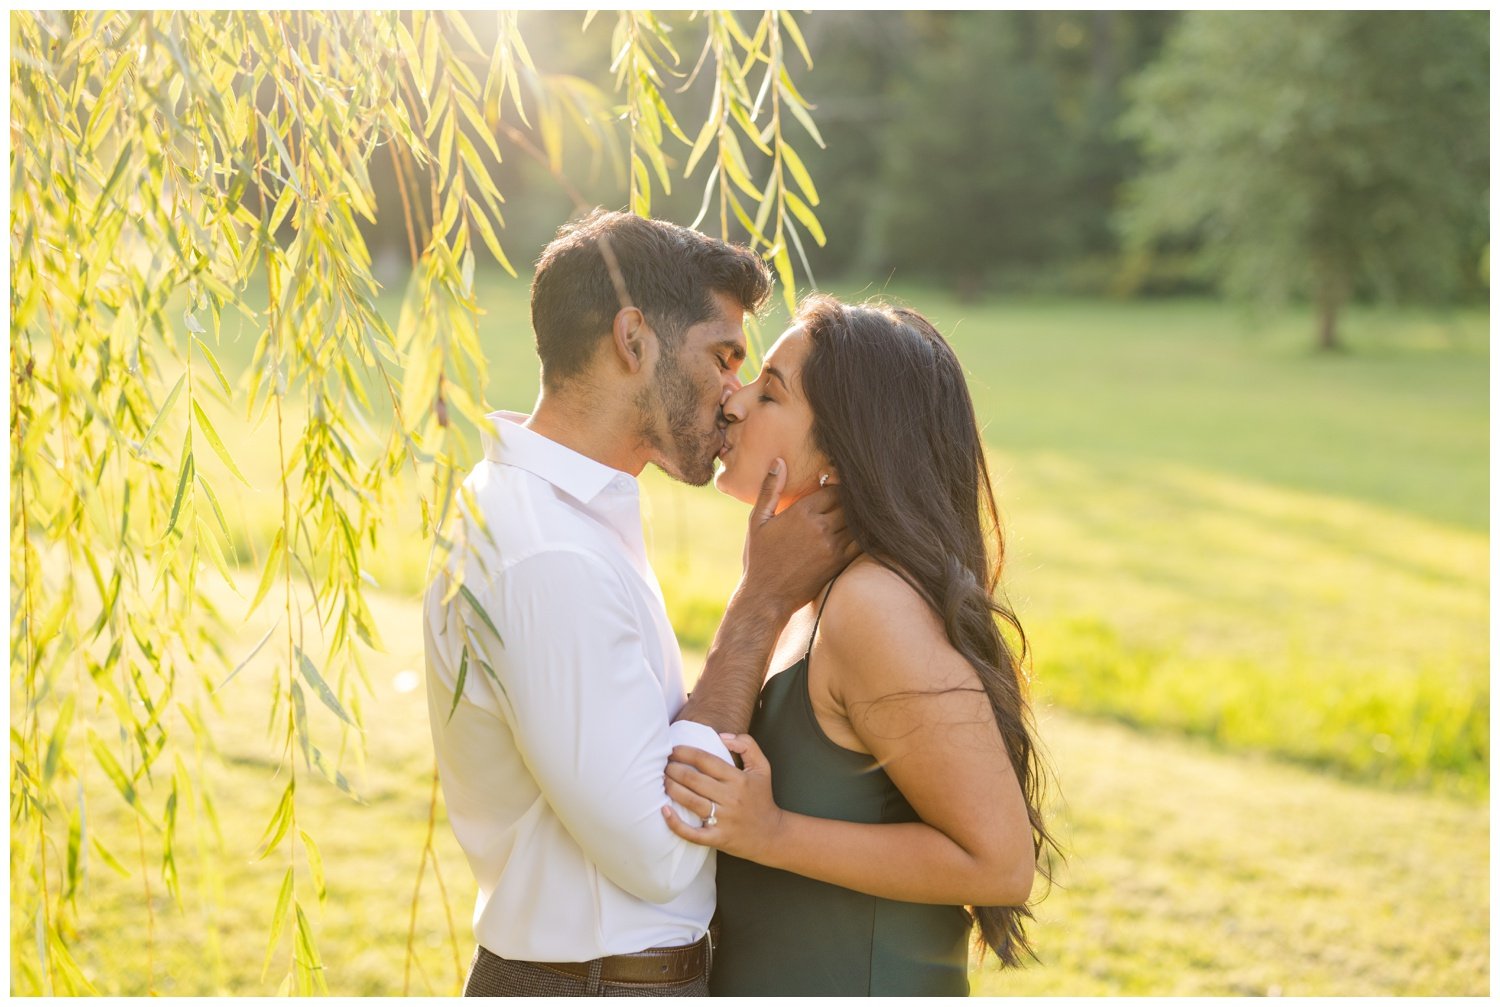 French-Creek-Park-PA-Summer-Lakeside-Engagement-Session-11.jpg